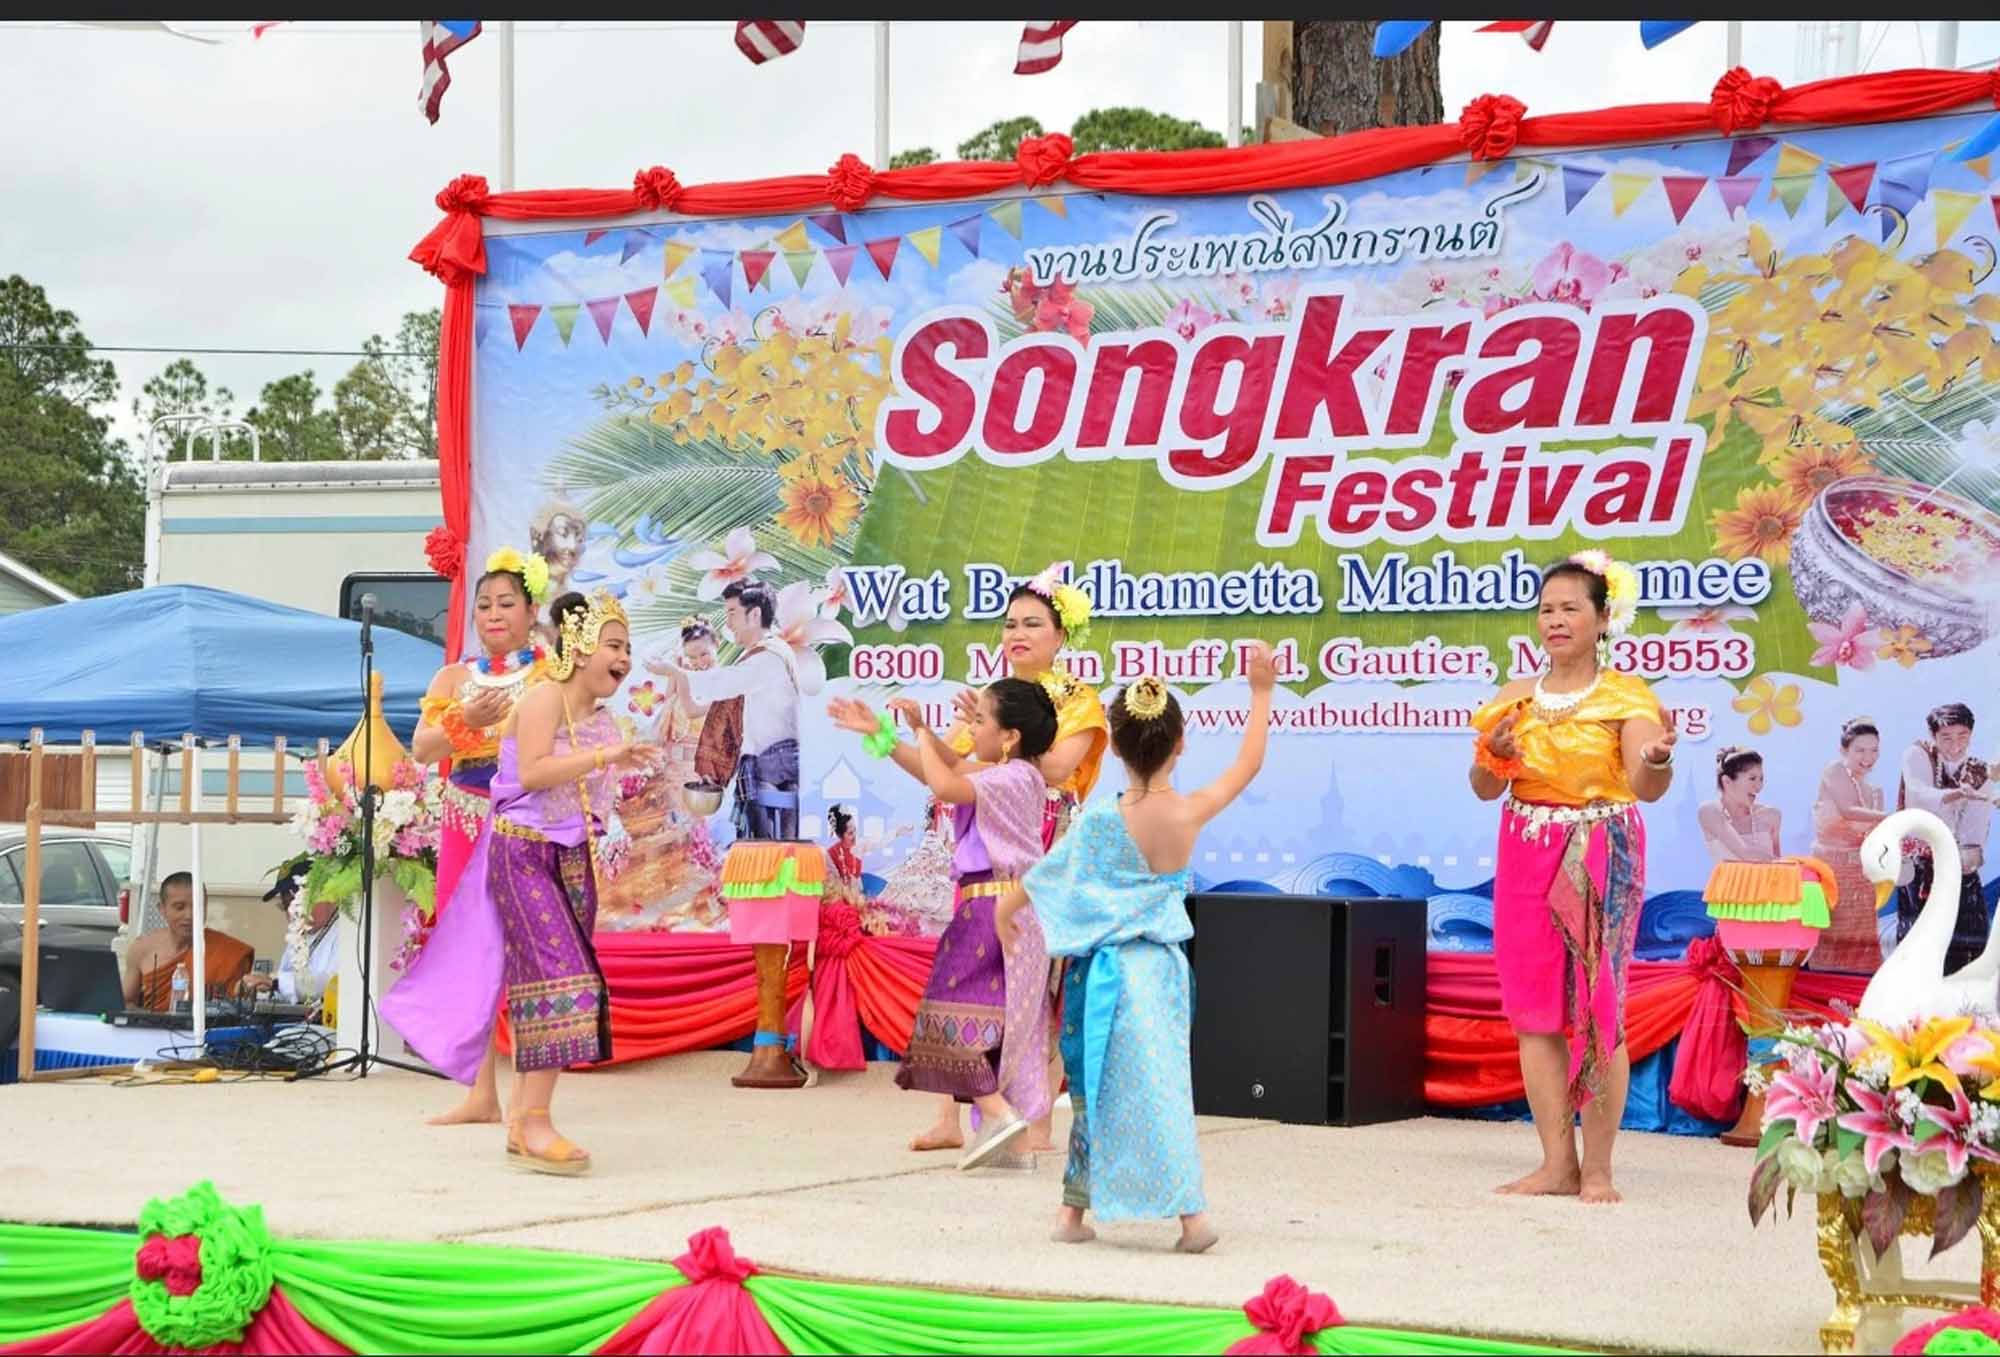 Children and adults participating in a festival on stage wearing colorful clothing and dancing. The sign in the background says Songkran Festival.